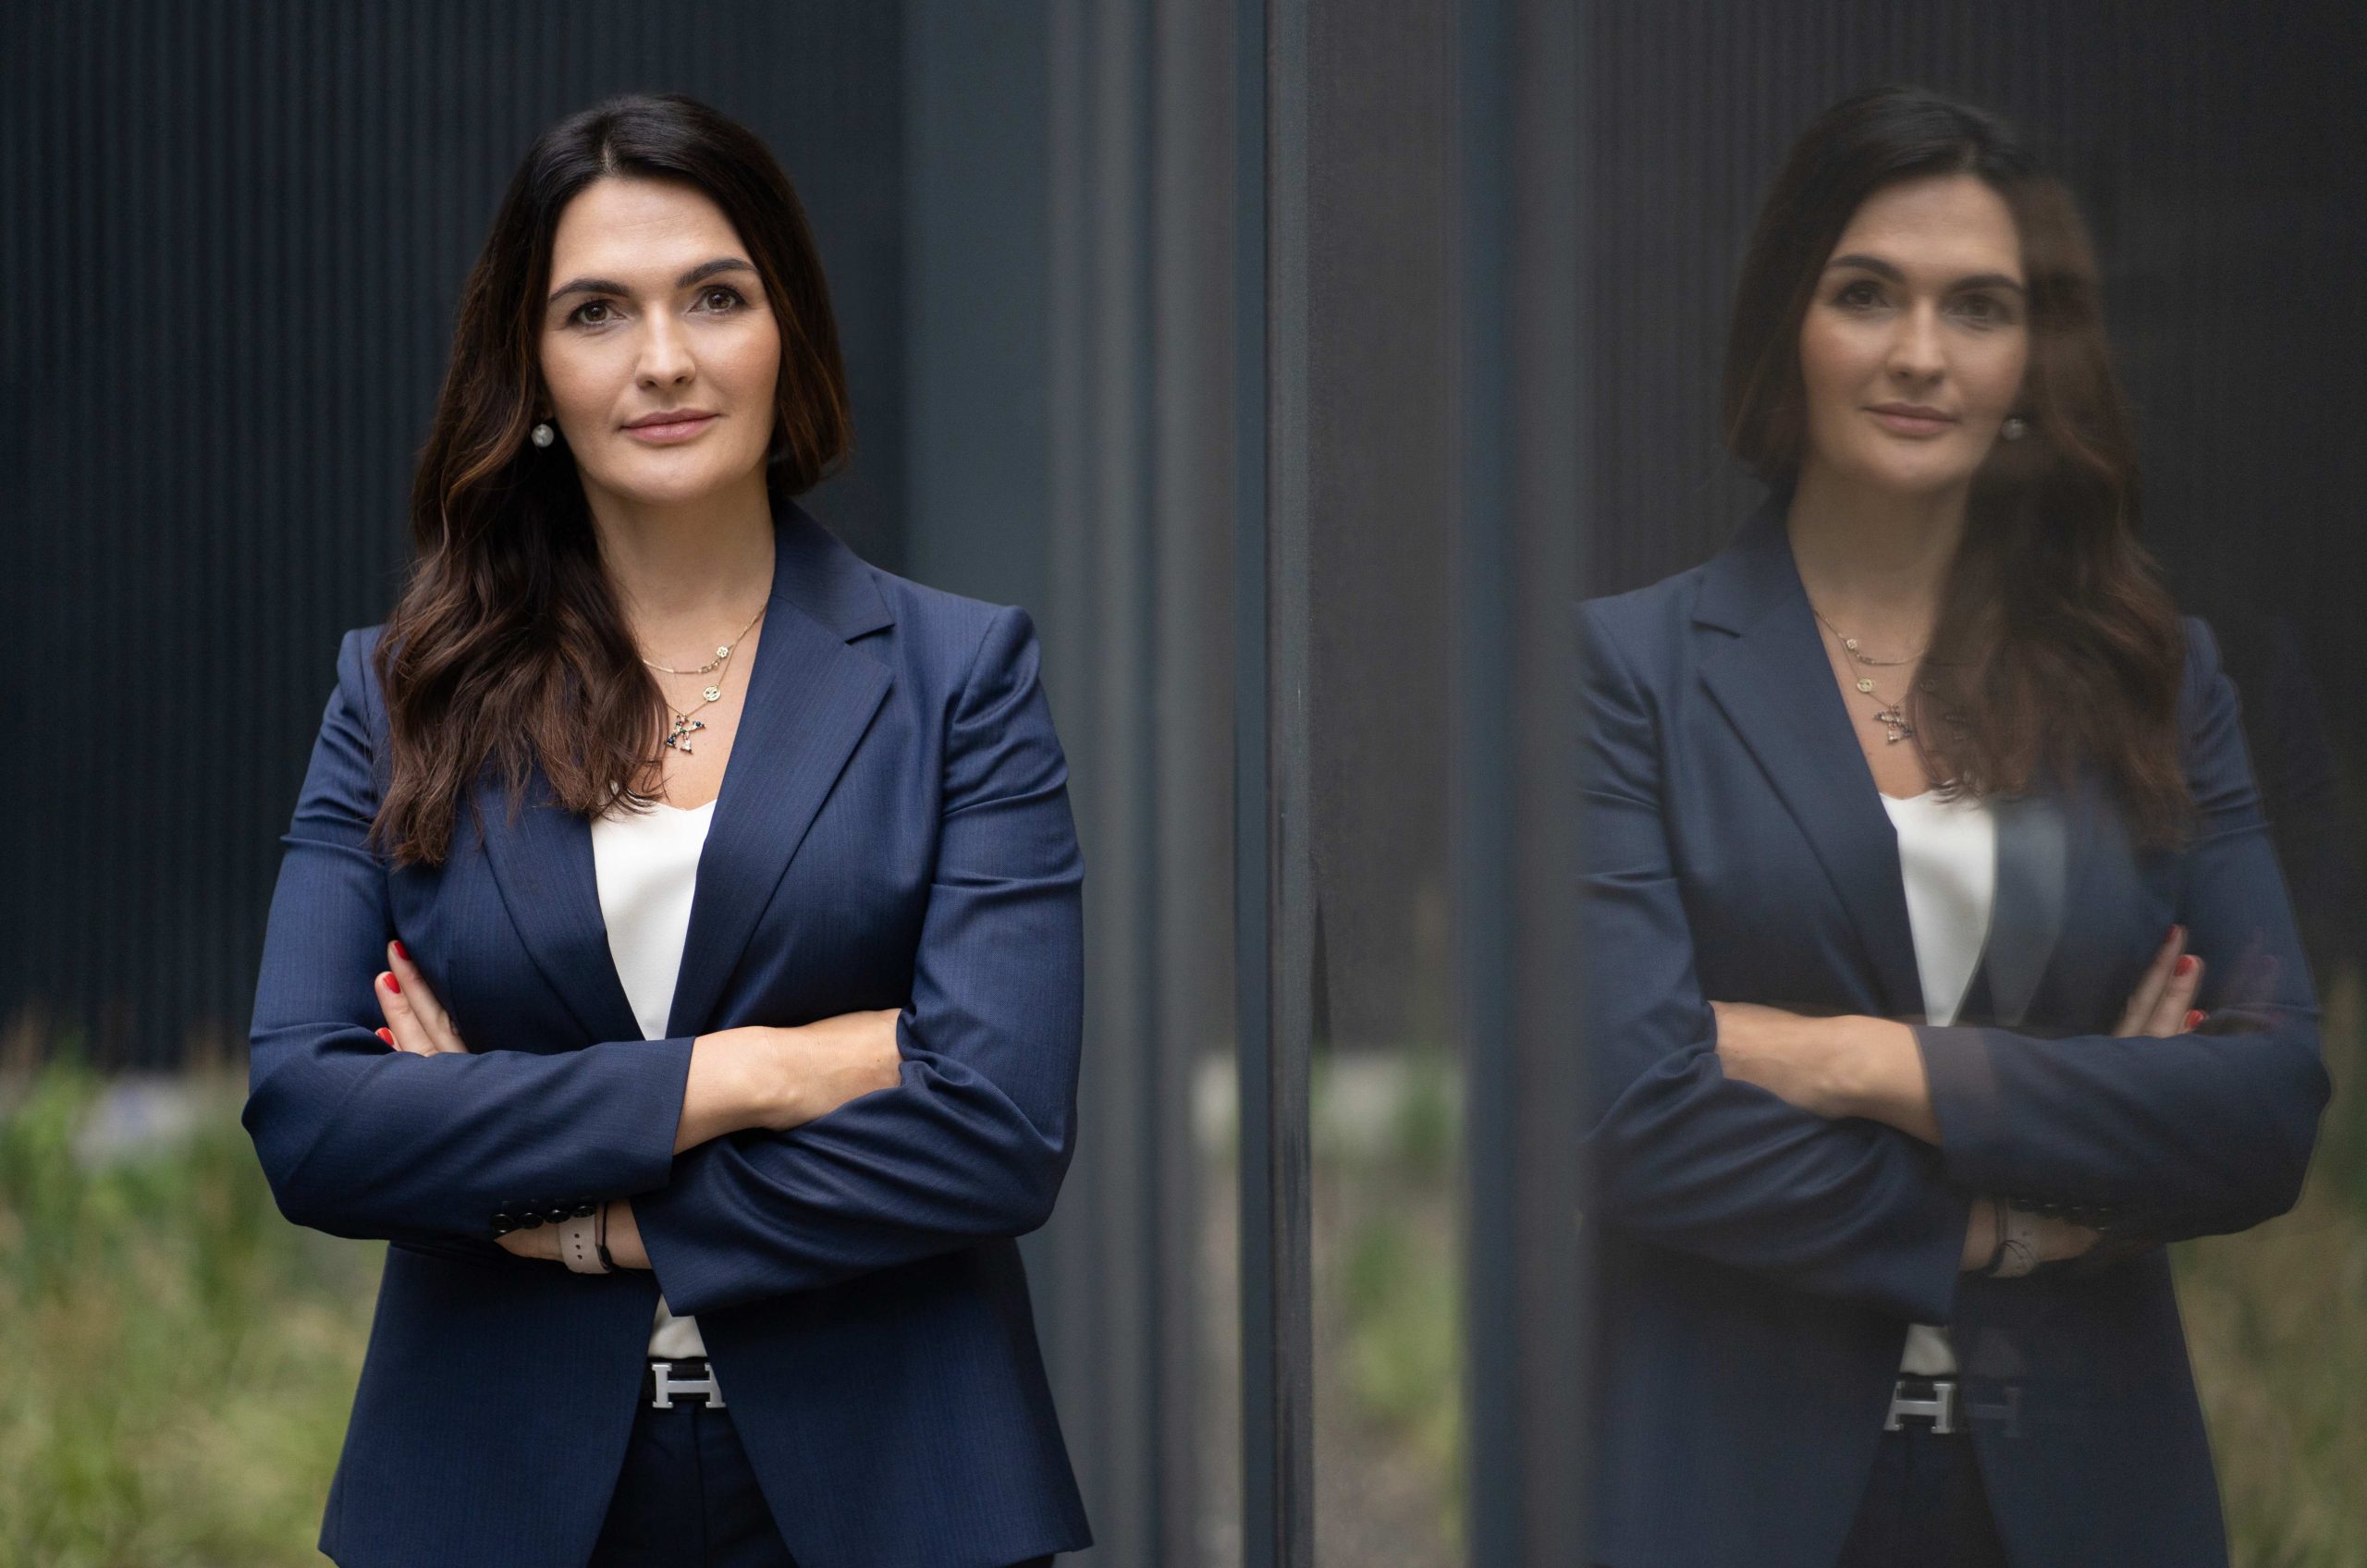 The right mindset and mechanisms are needed to promote gender balance in organizations. Interview with Katarzyna Zawodna-Bijoch, President & CEO at Skanska commercial development unit in Central & Eastern Europe